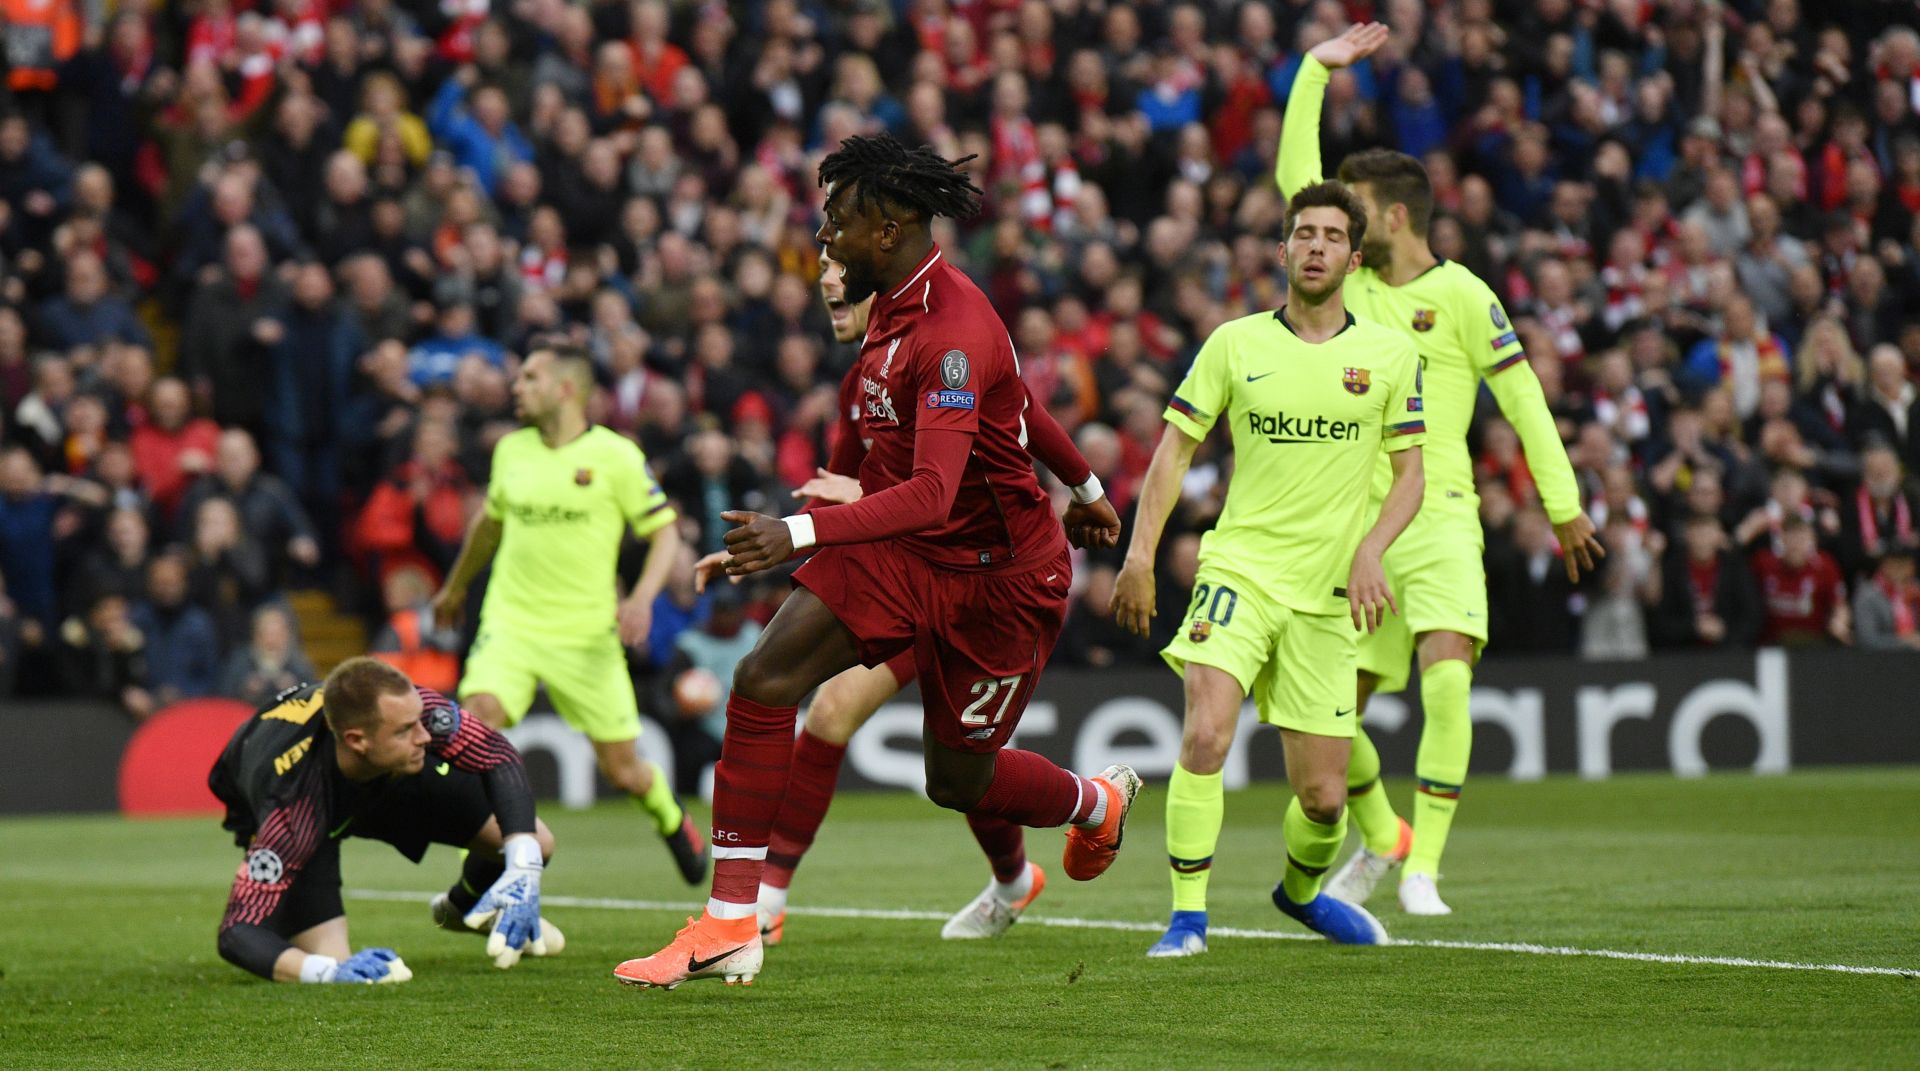 epa07554424 Divock Origi (C) of Liverpool scores the opening goal during the UEFA Champions League semi final 2nd leg match between Liverpool FC and FC Barcelona at Anfield, Liverpool, Britain, 07 May 2019.  EPA/NEIL HALL